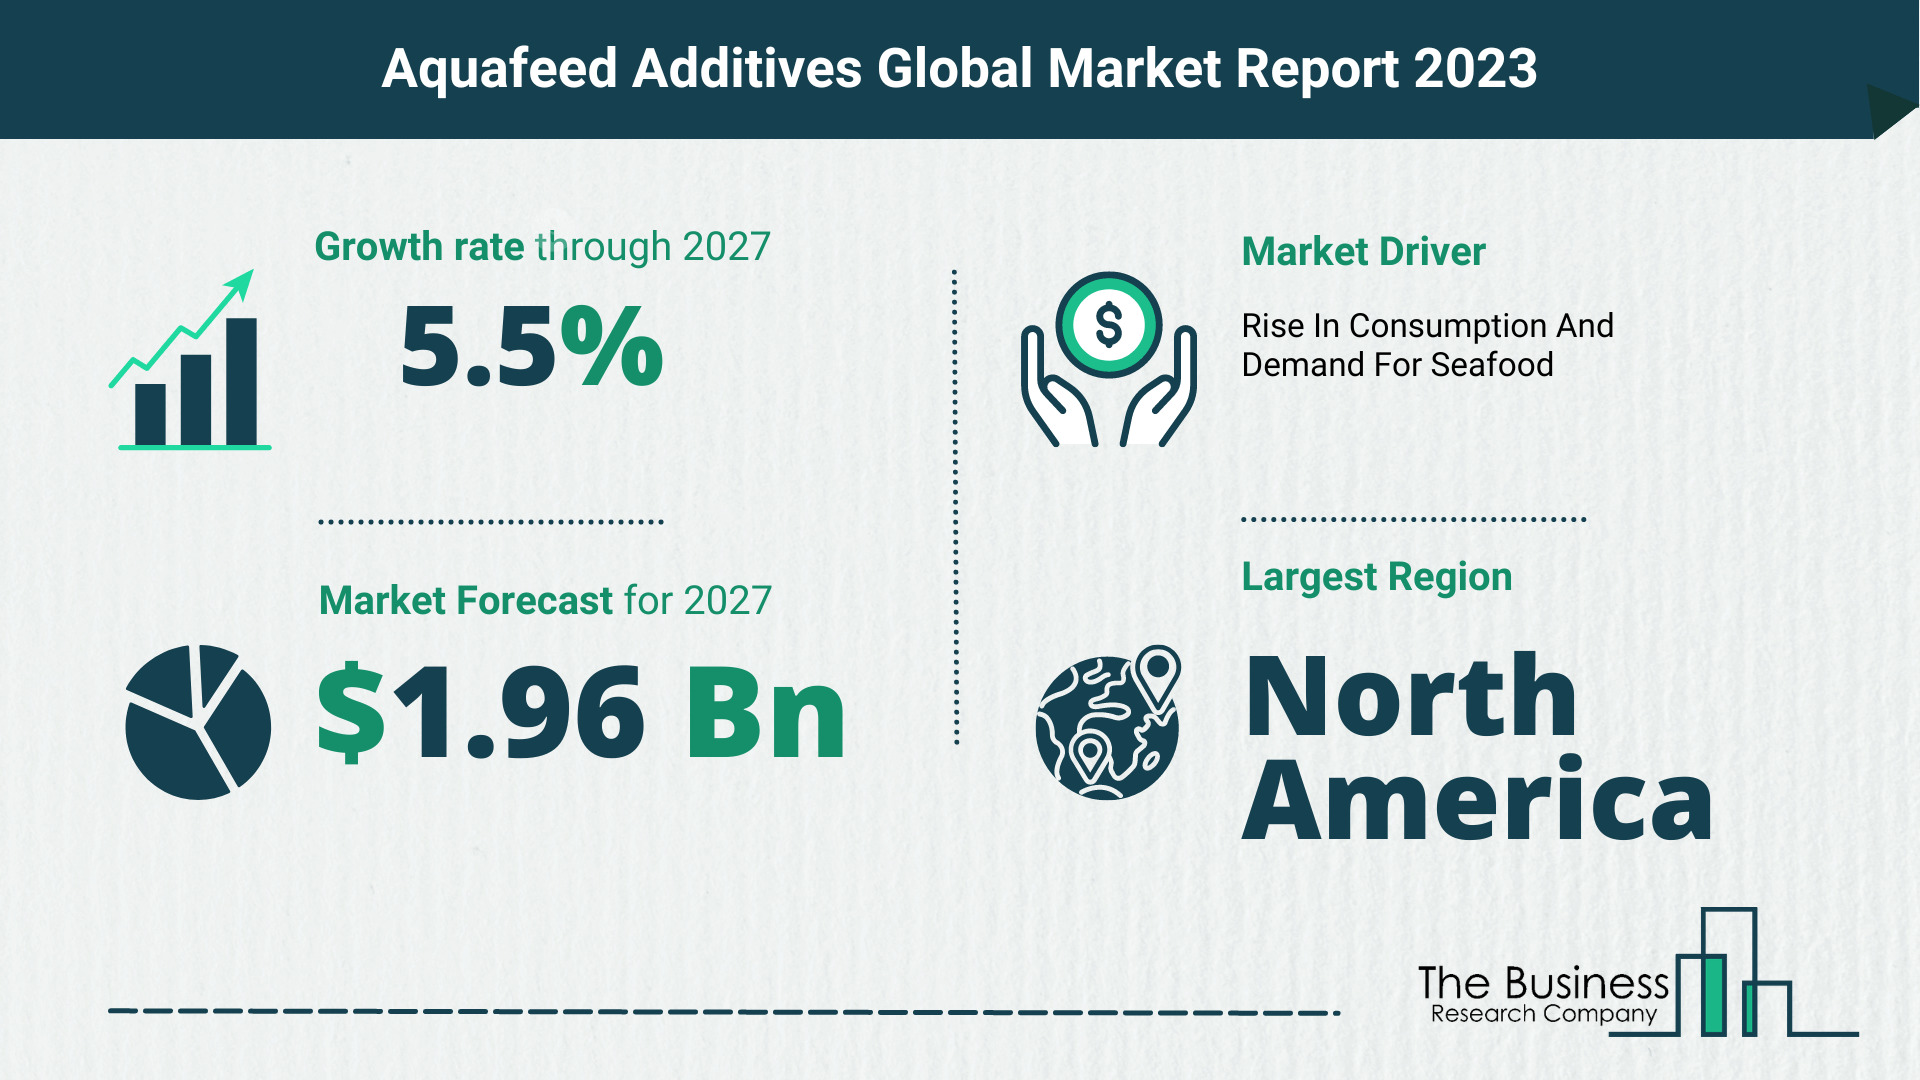 Aquafeed Additives Market Size, Share, And Growth Rate Analysis 2023